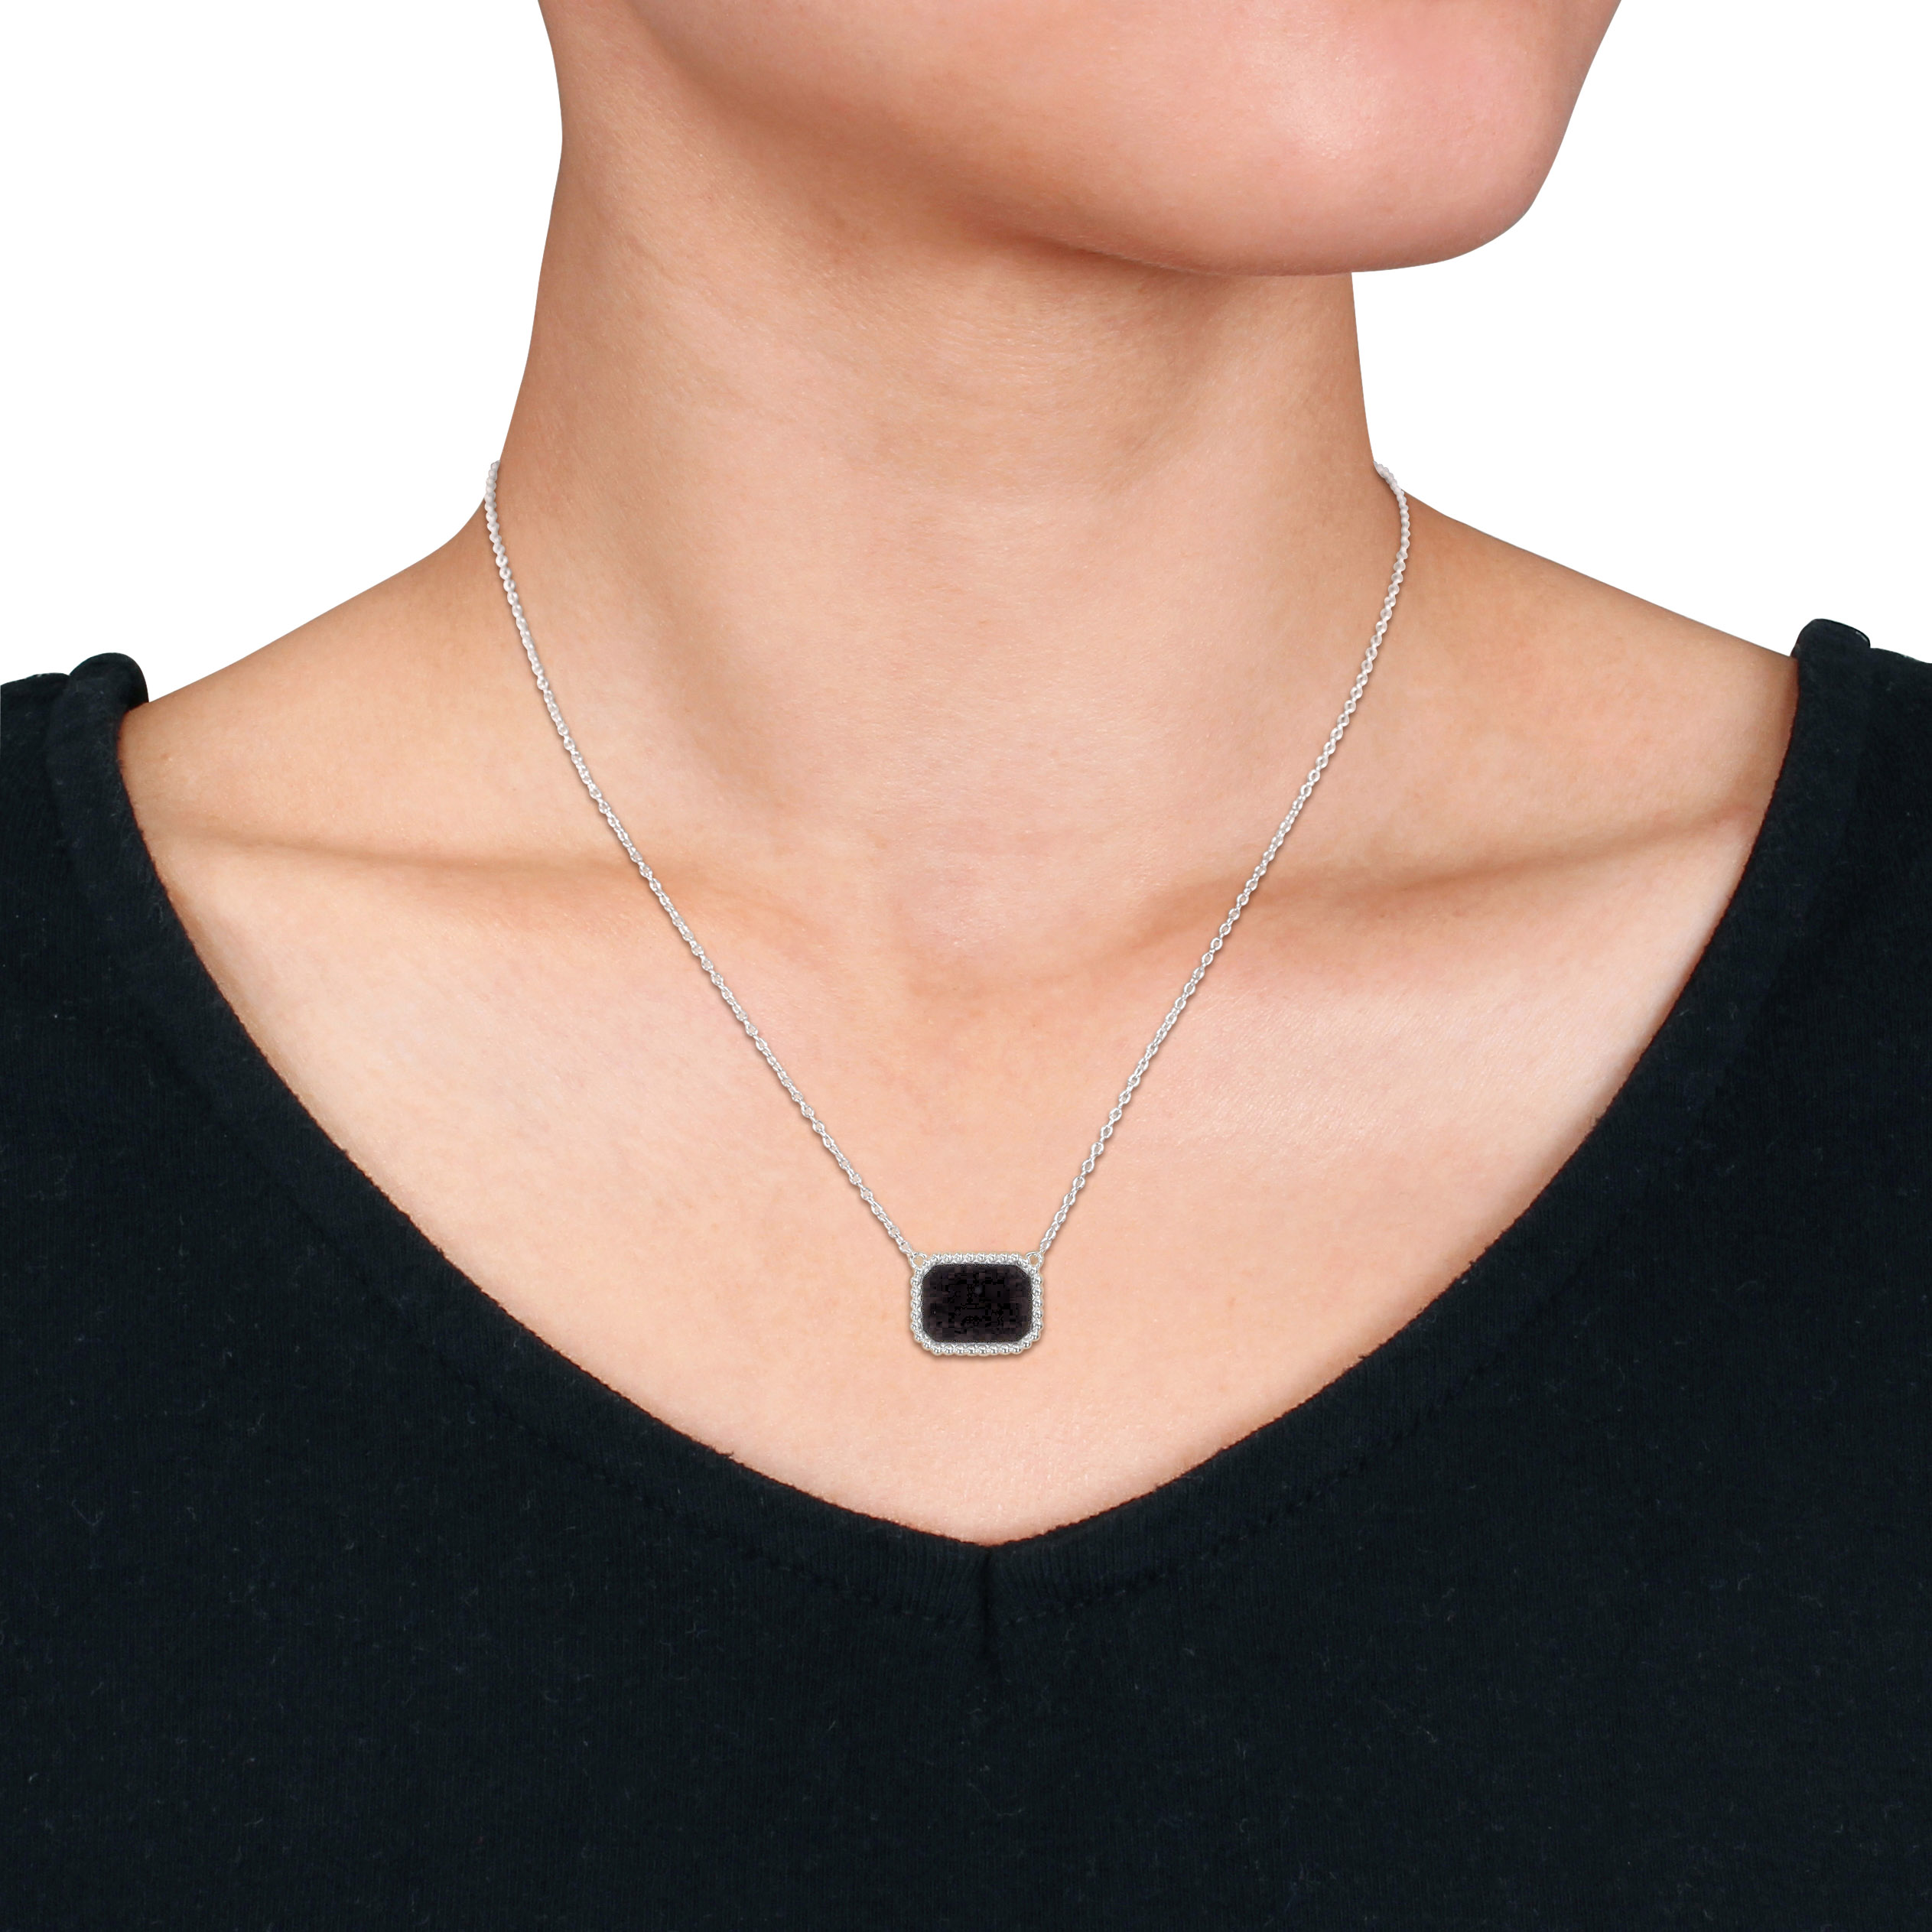 5 CT TGW Octagon Shape Black Agate Necklace With Beaded Halo in Sterling Silver - 17 in.